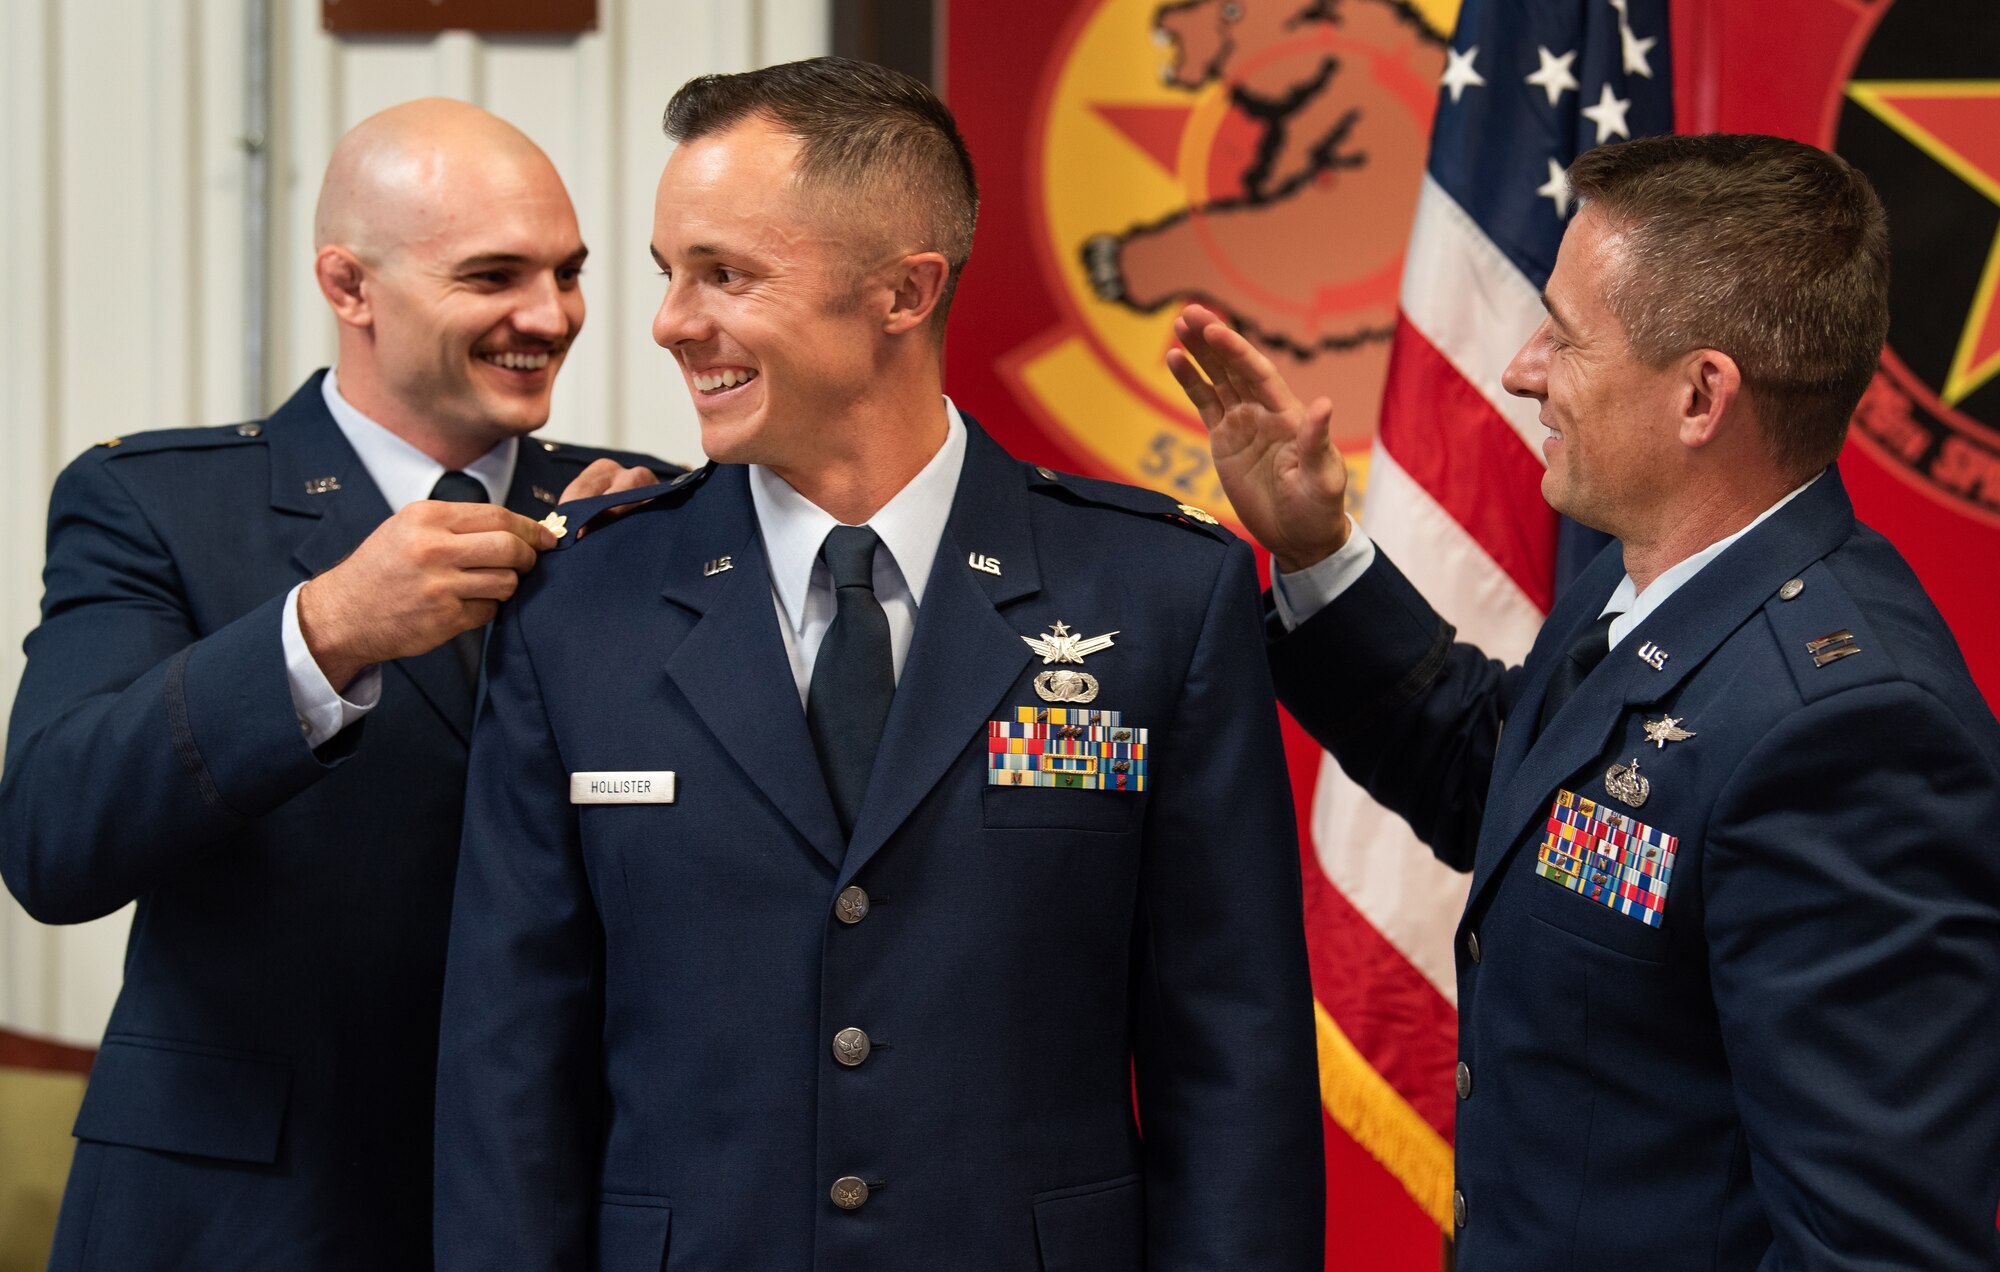 Maj. Scott Hollister’s brothers, Taylor (left) and Ryan (right) pin on his new rank during Scott’s promotion ceremony Sept. 8, 2019.